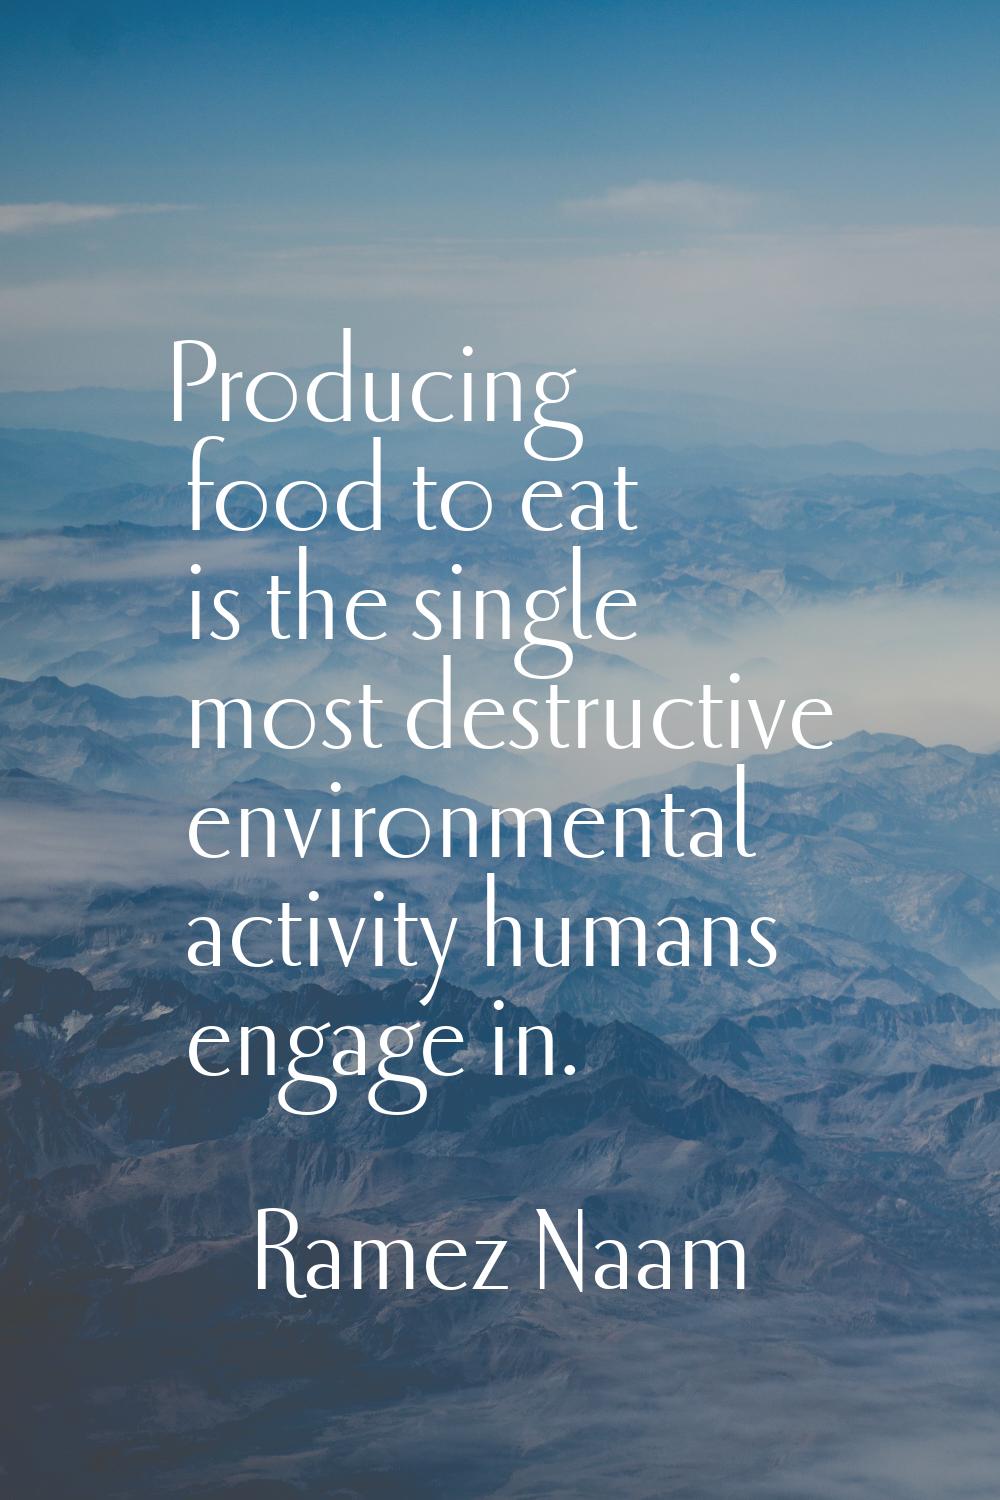 Producing food to eat is the single most destructive environmental activity humans engage in.